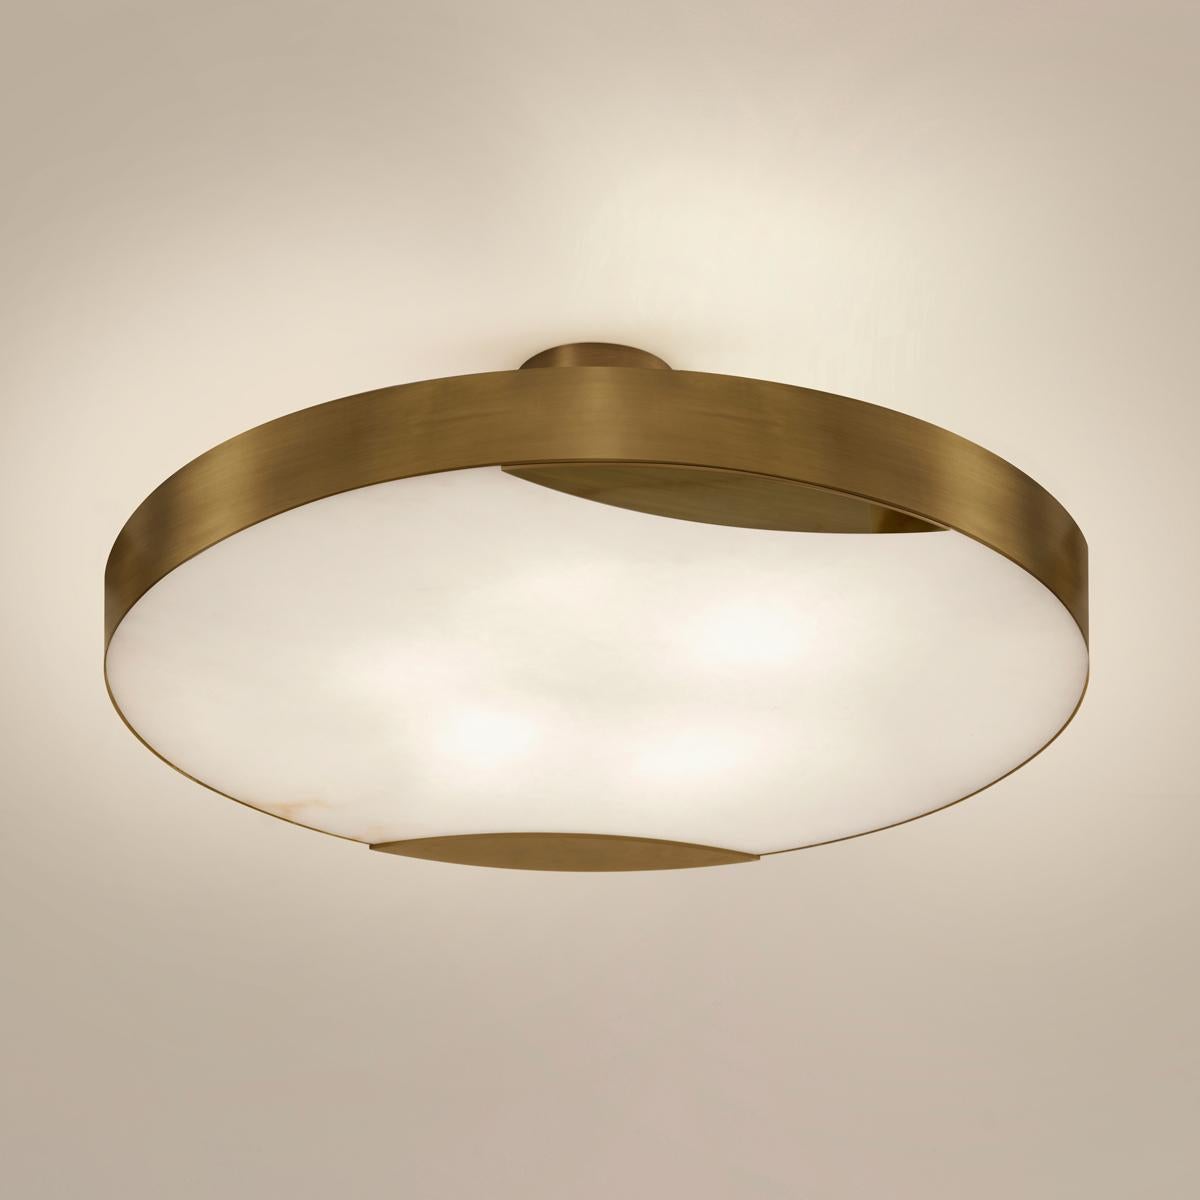 Contemporary Cloud N.1 Ceiling Light by Gaspare Asaro-Peltro Finish For Sale